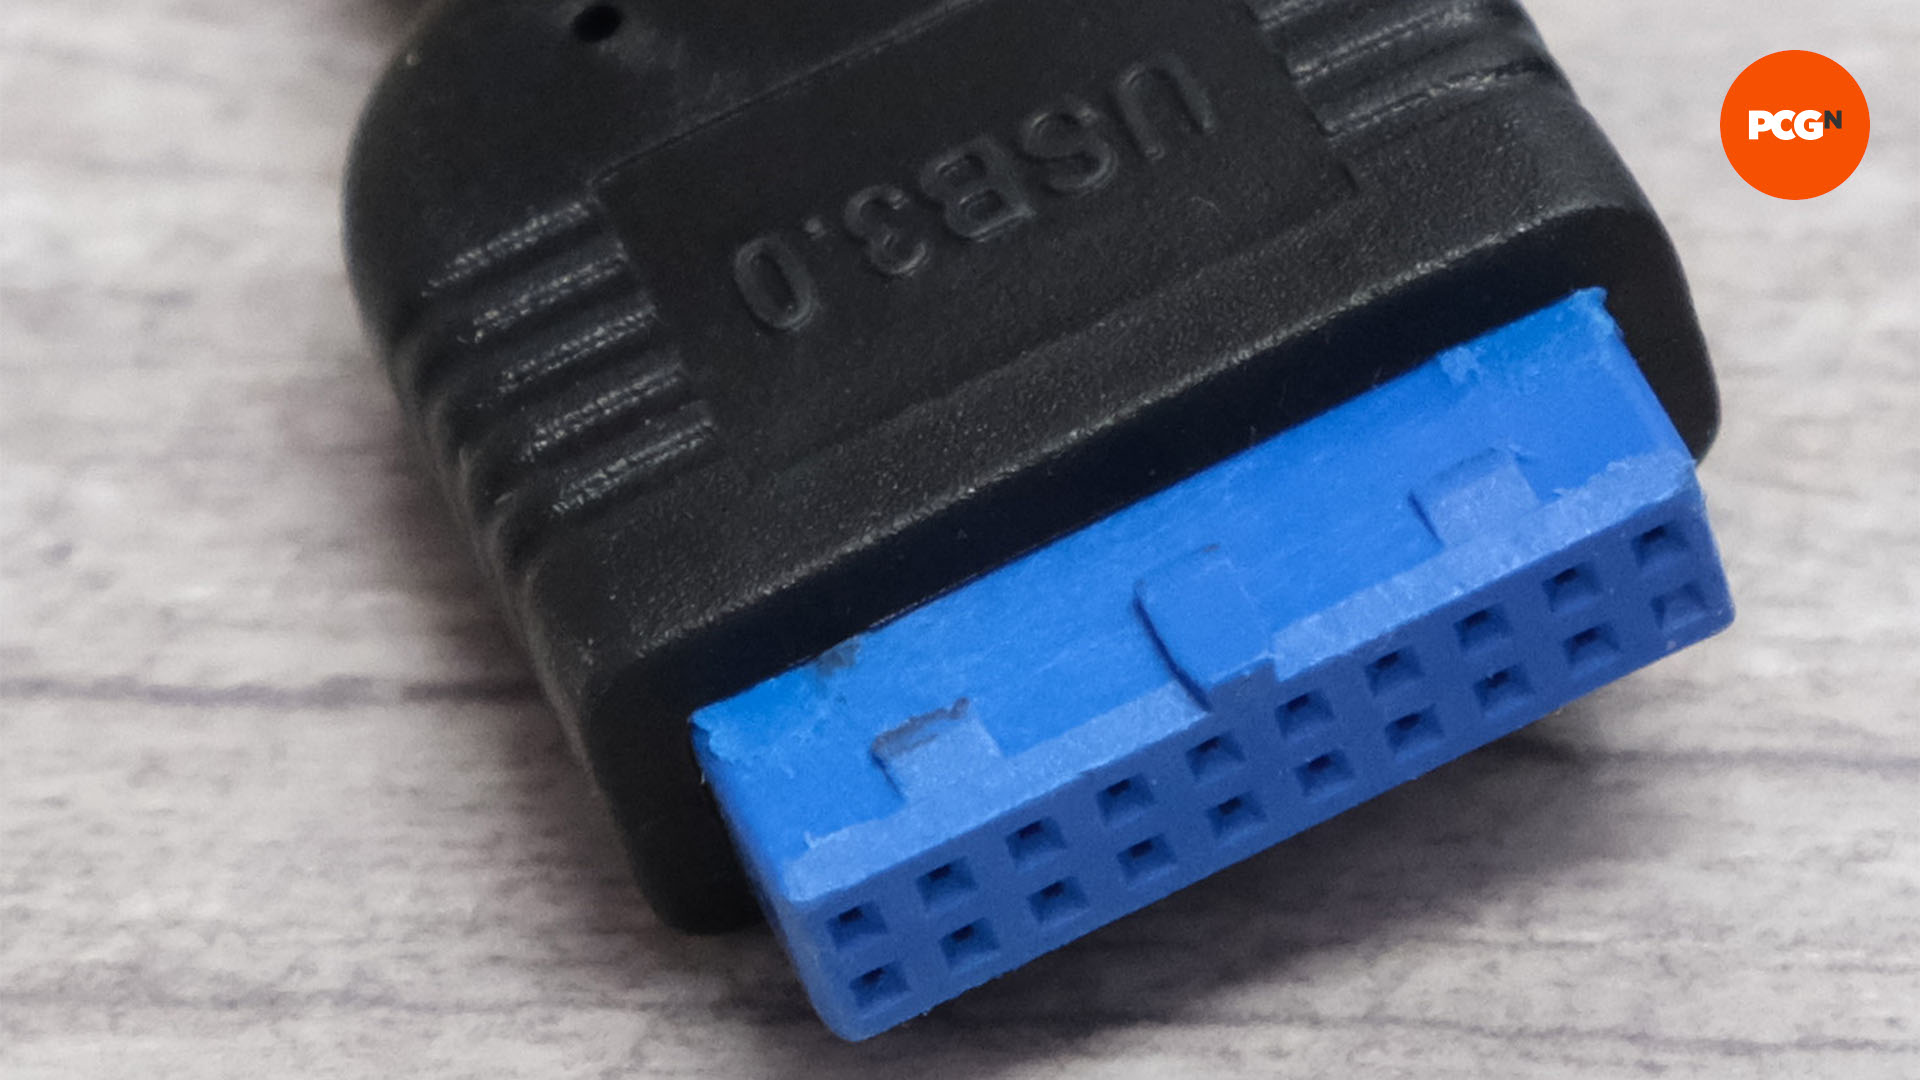 The blue USB3 plug for the motherboard